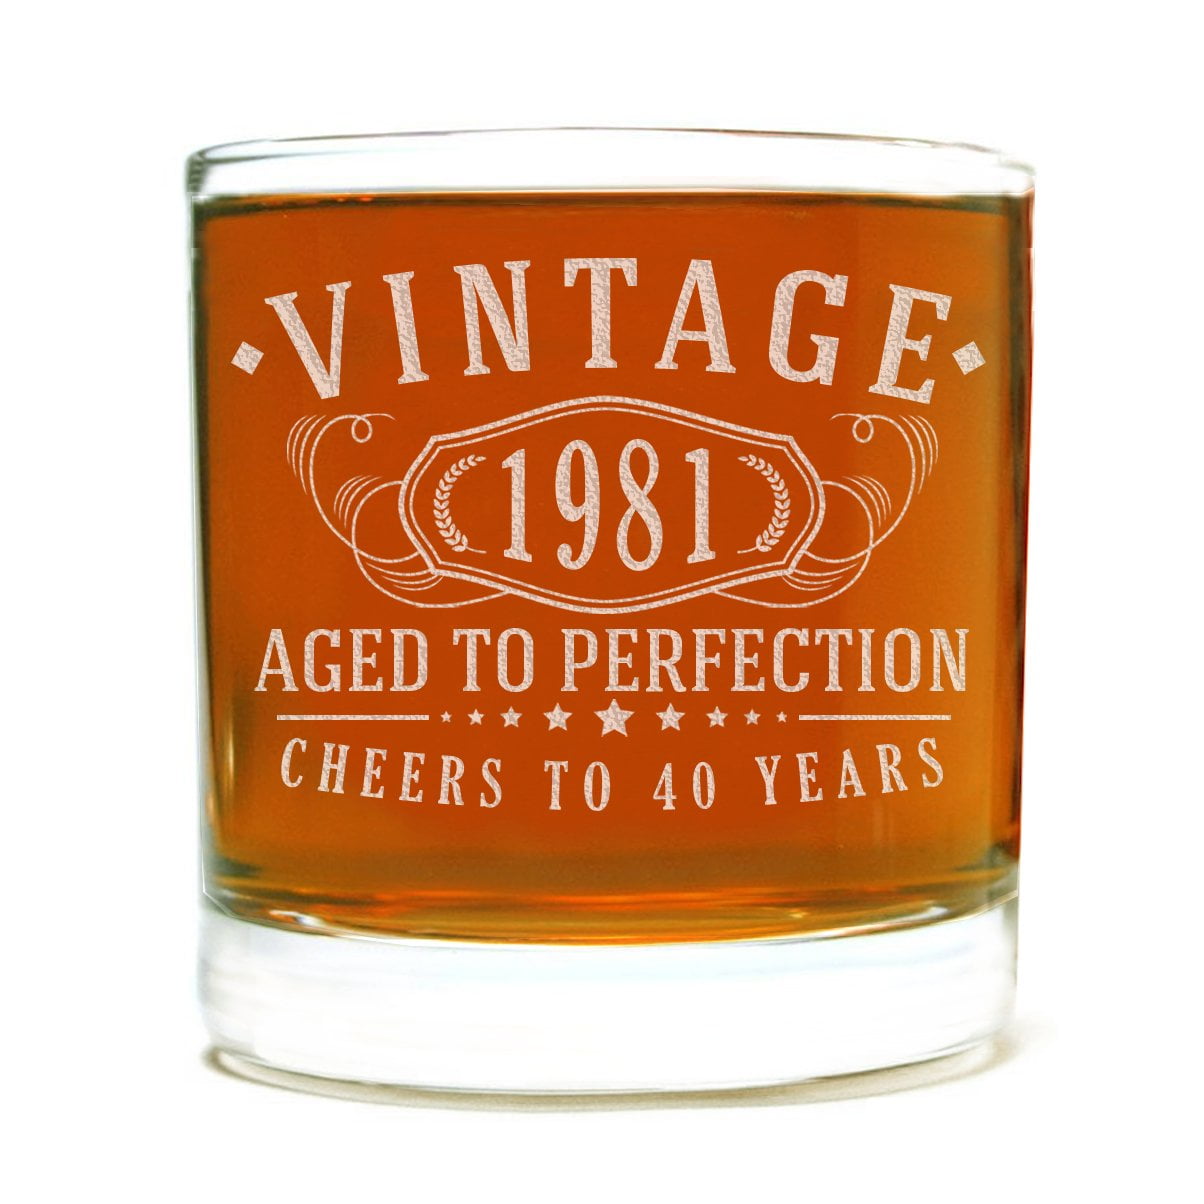 Snifter Glass Age to Perfaction Glass,CHEERS TO 60 YEARS Scotch Glass Birthday Scotch Glass Scotch Glass For him